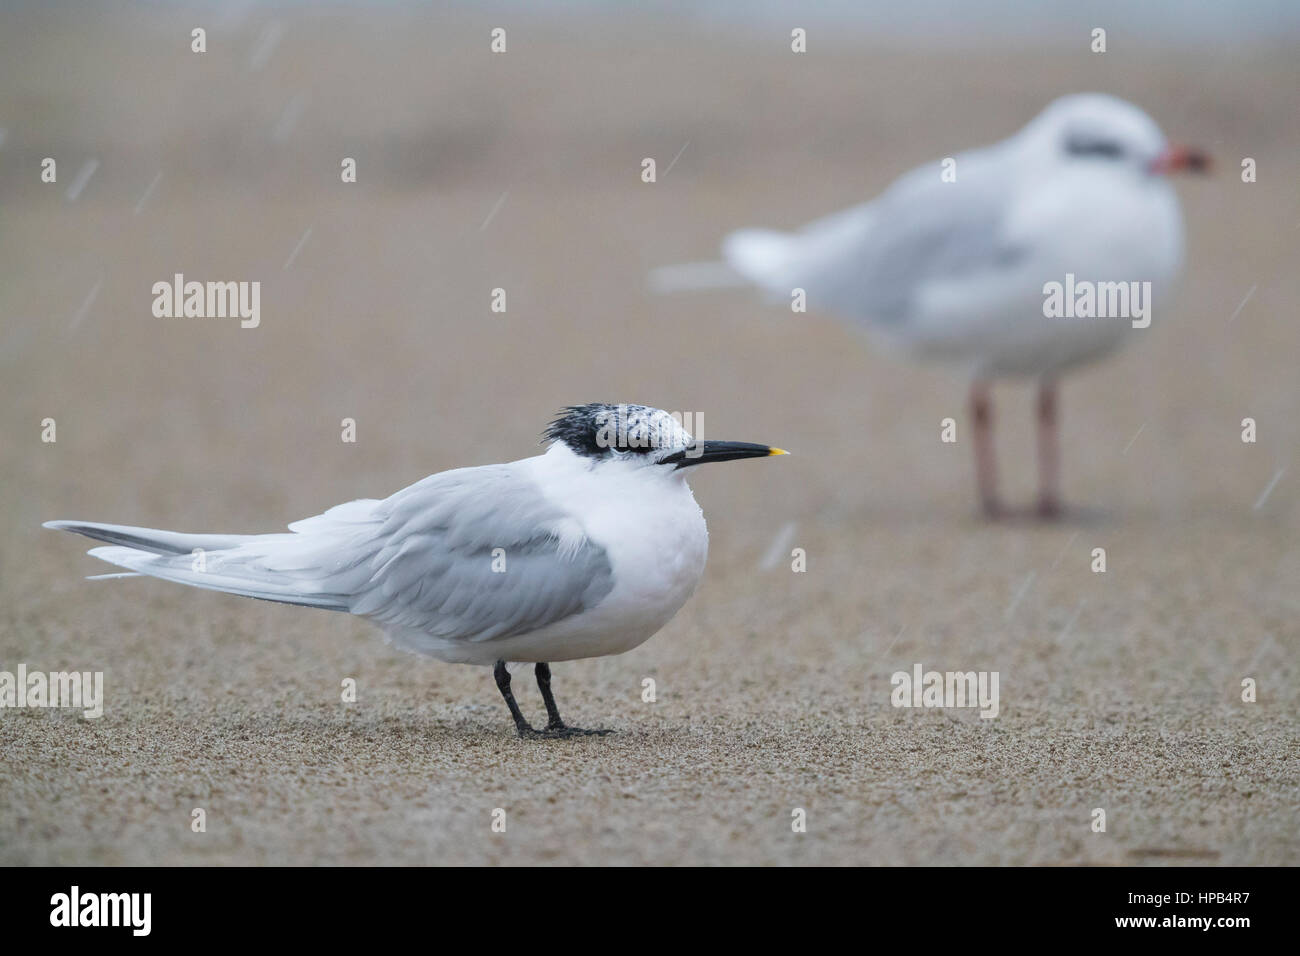 Sandwich Tern (Thalasseus sandvicensis), adult resting on a beach together with a Mediterranean gull Stock Photo